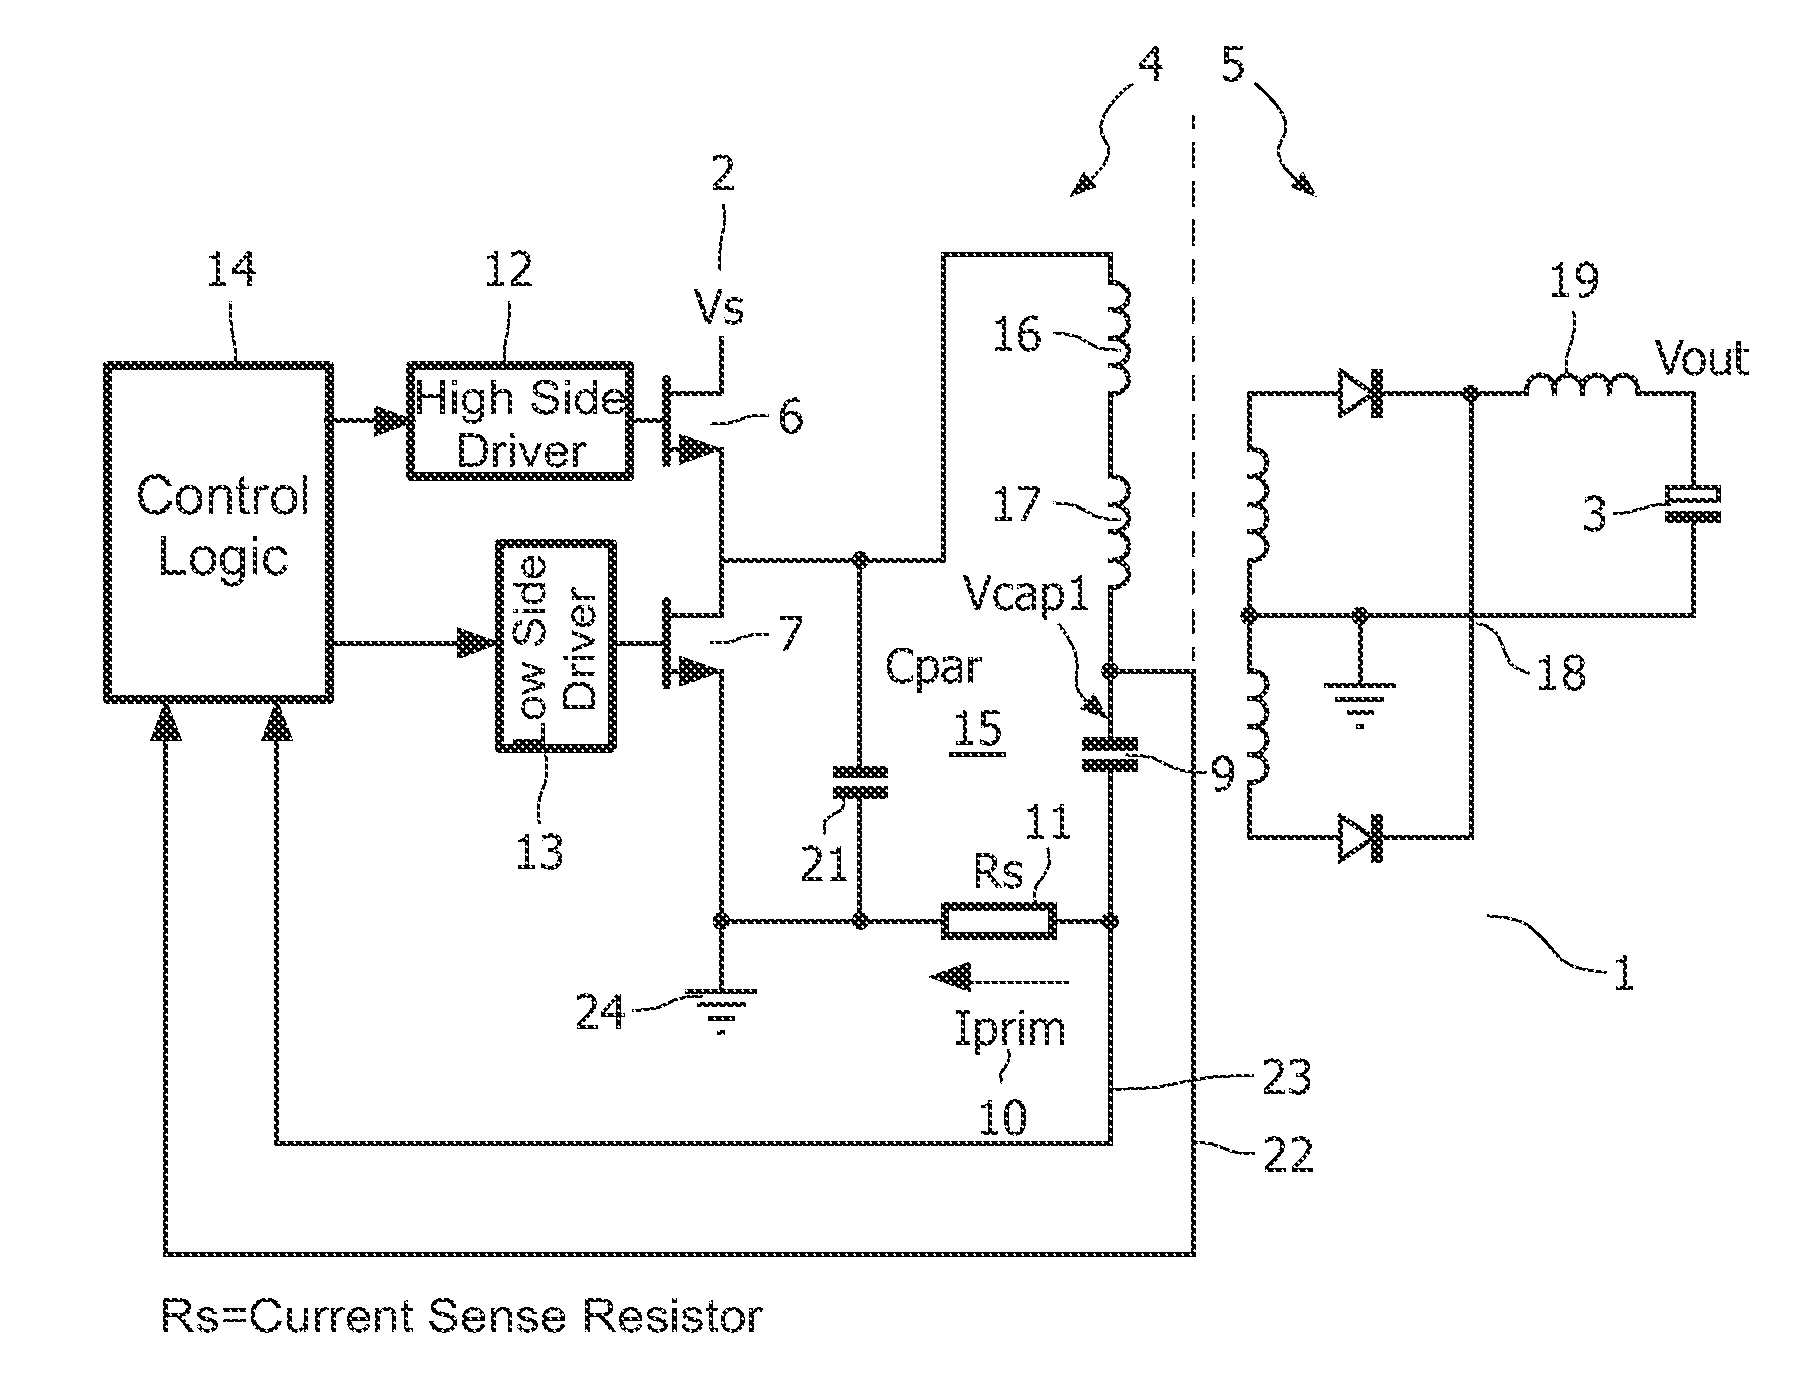 Control of a resonant converter by setting up criteria for state parameters of the resonant converter